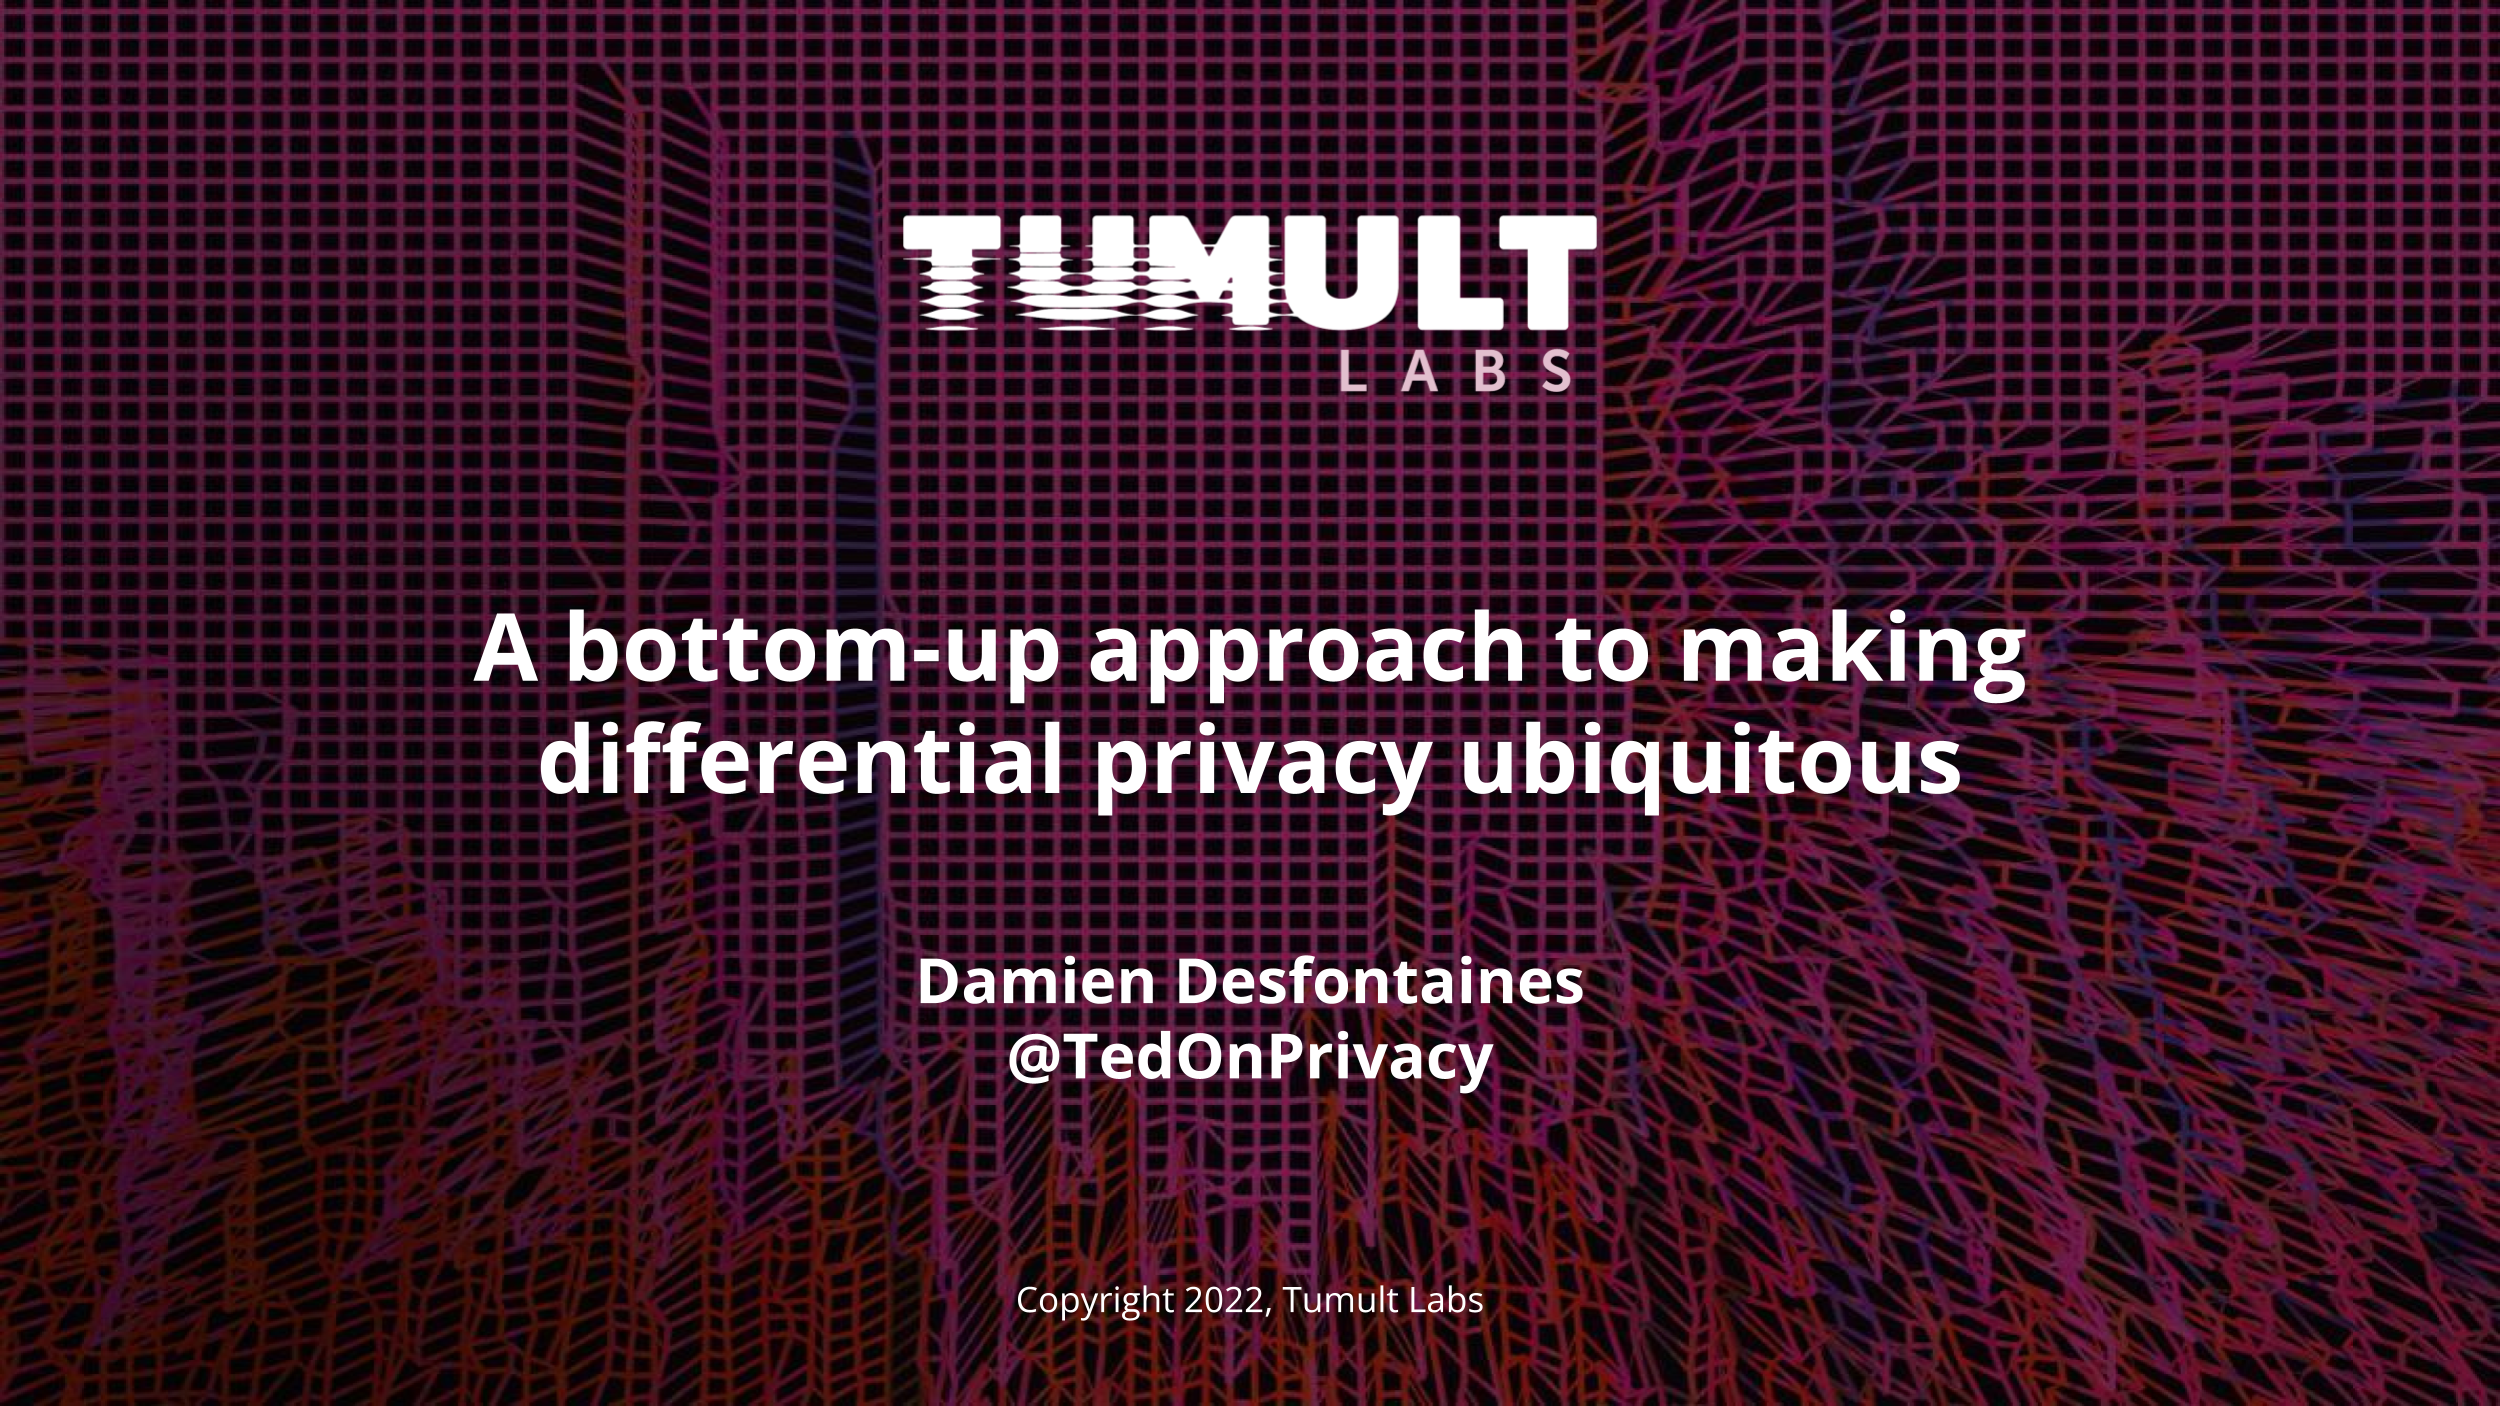 The introductory slide of a talk titled "A bottom-up approach to making
differential privacy ubiquitous". The slide contains author information (Damien
Desfontaines, @TedOnPrivacy), affiliation (the Tumult Labs logo), and a
copyright notice. The text is in white, the image behind is a series of
perturbed purple lines on a black
background.